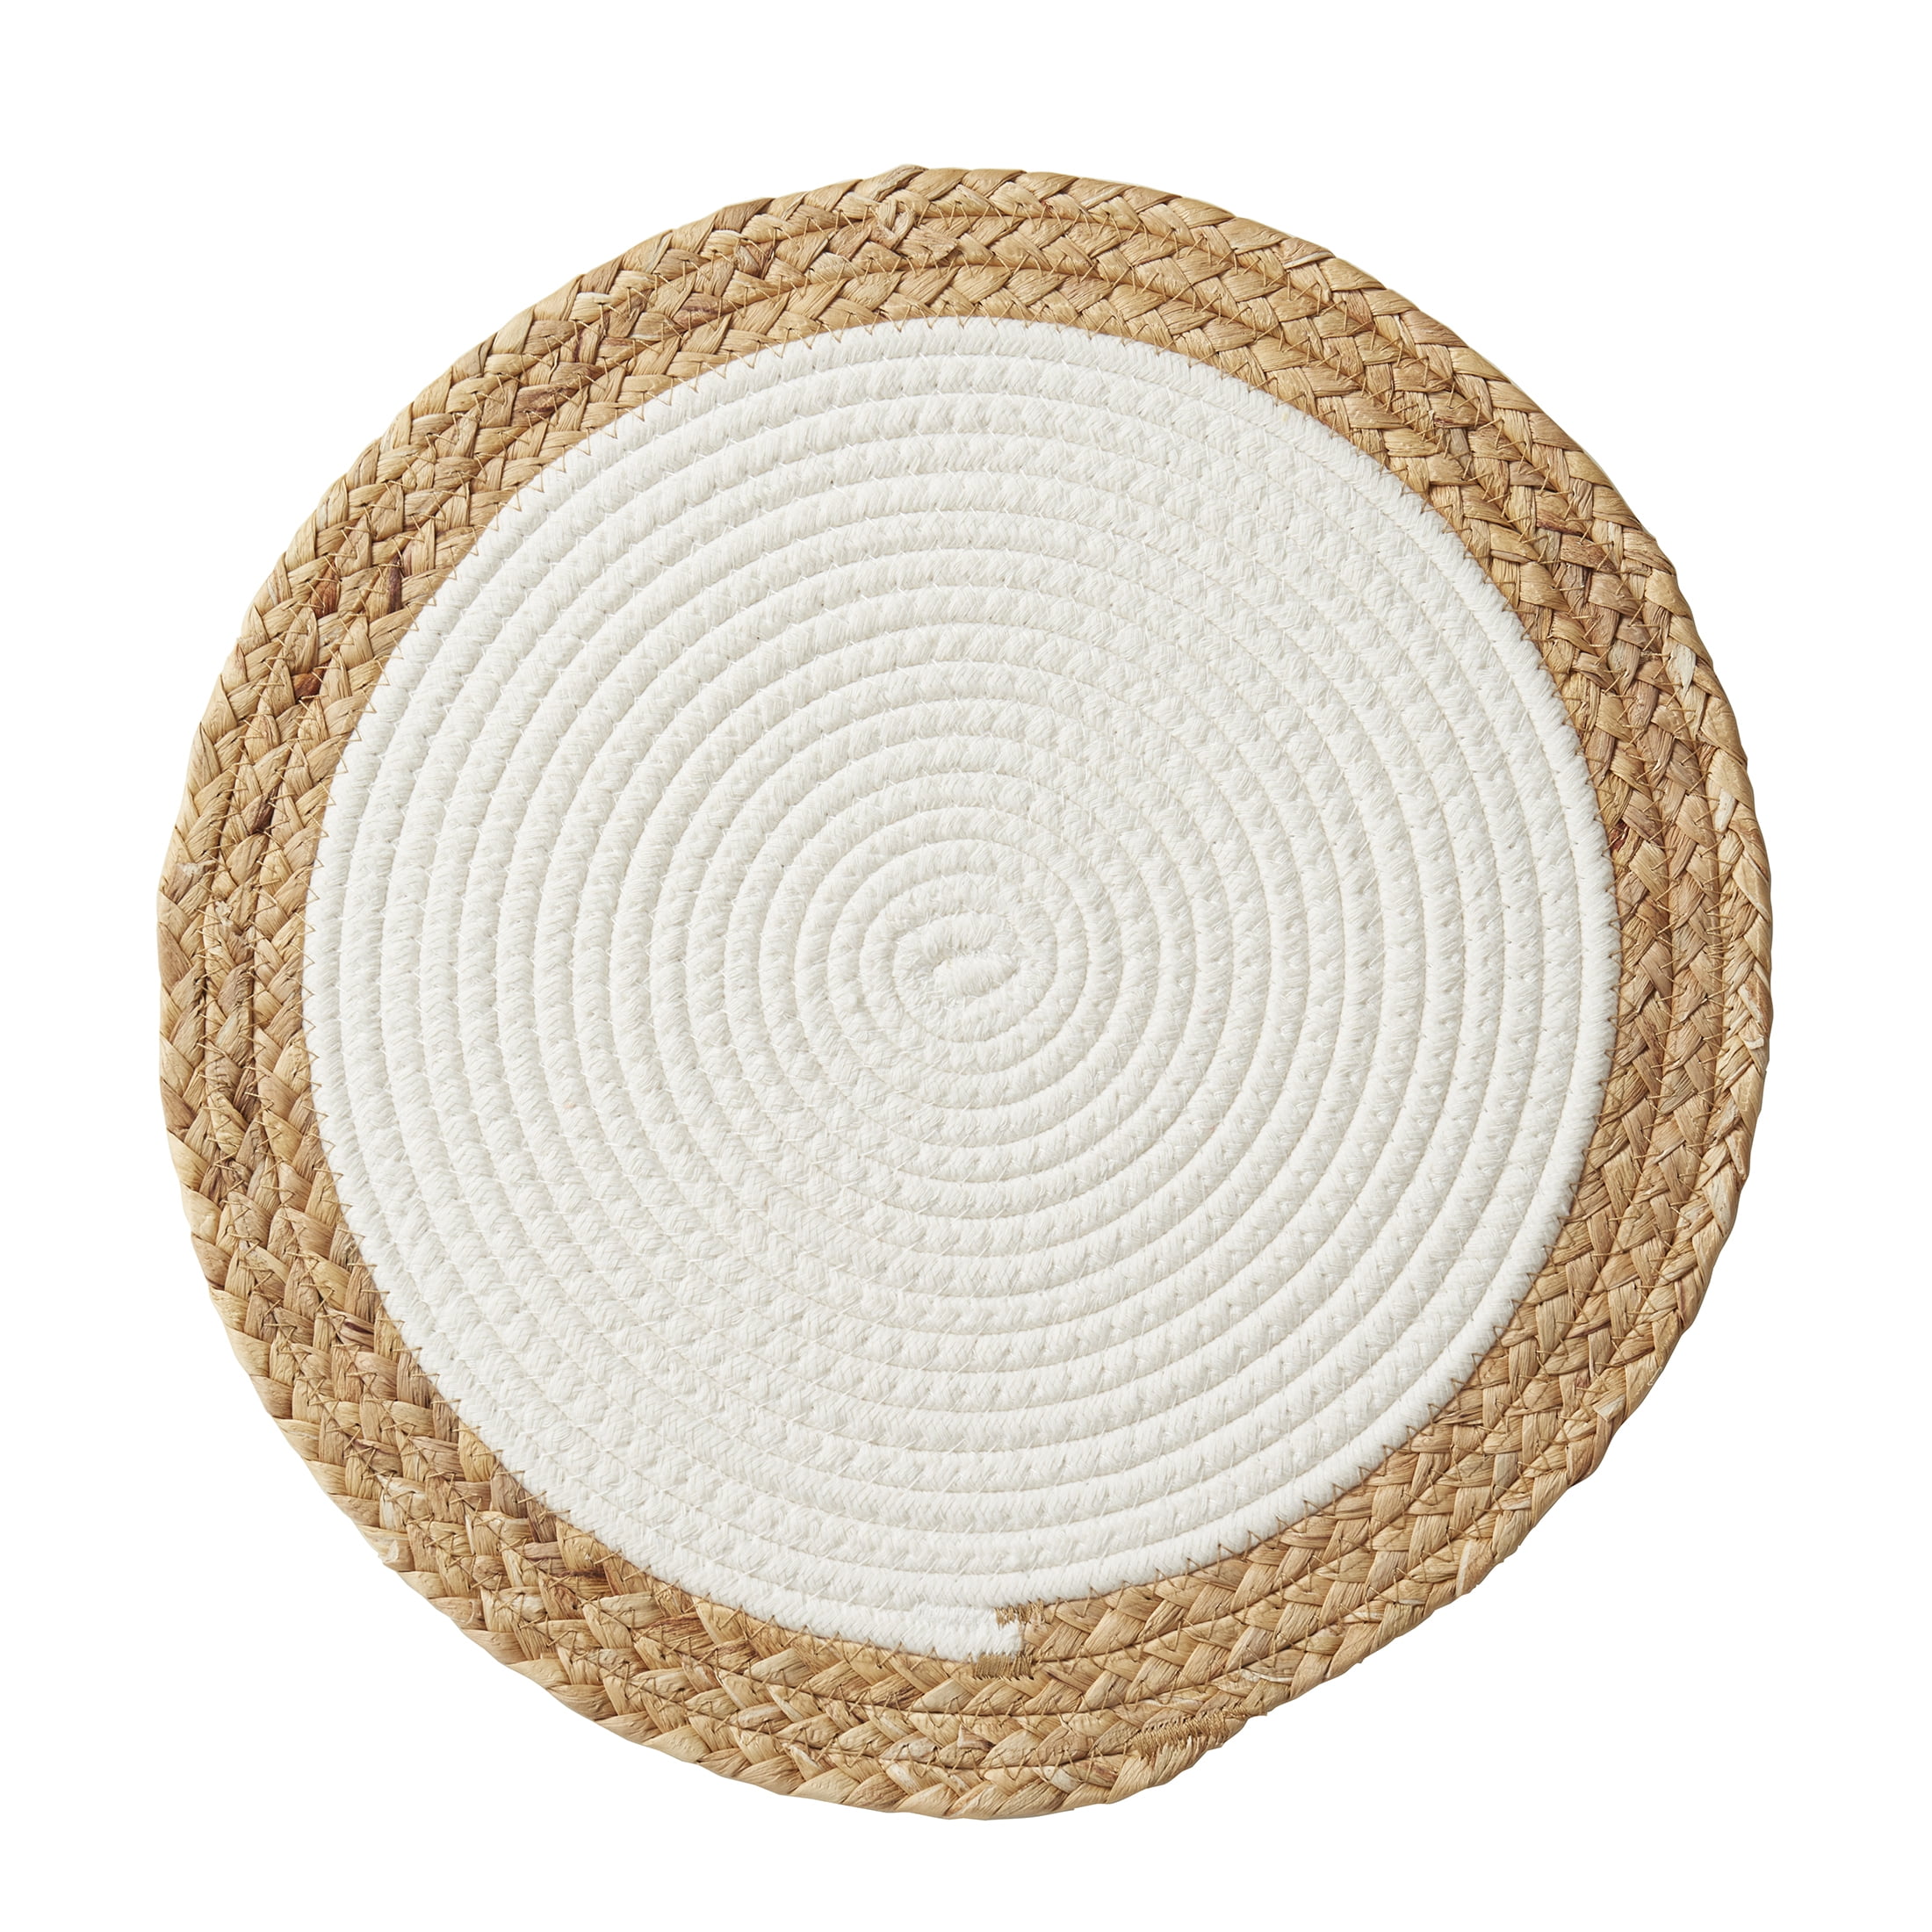 Better Homes & Gardens Cotton Hyacinth 15" Round Table Placemat, Natural White, 1 Piece